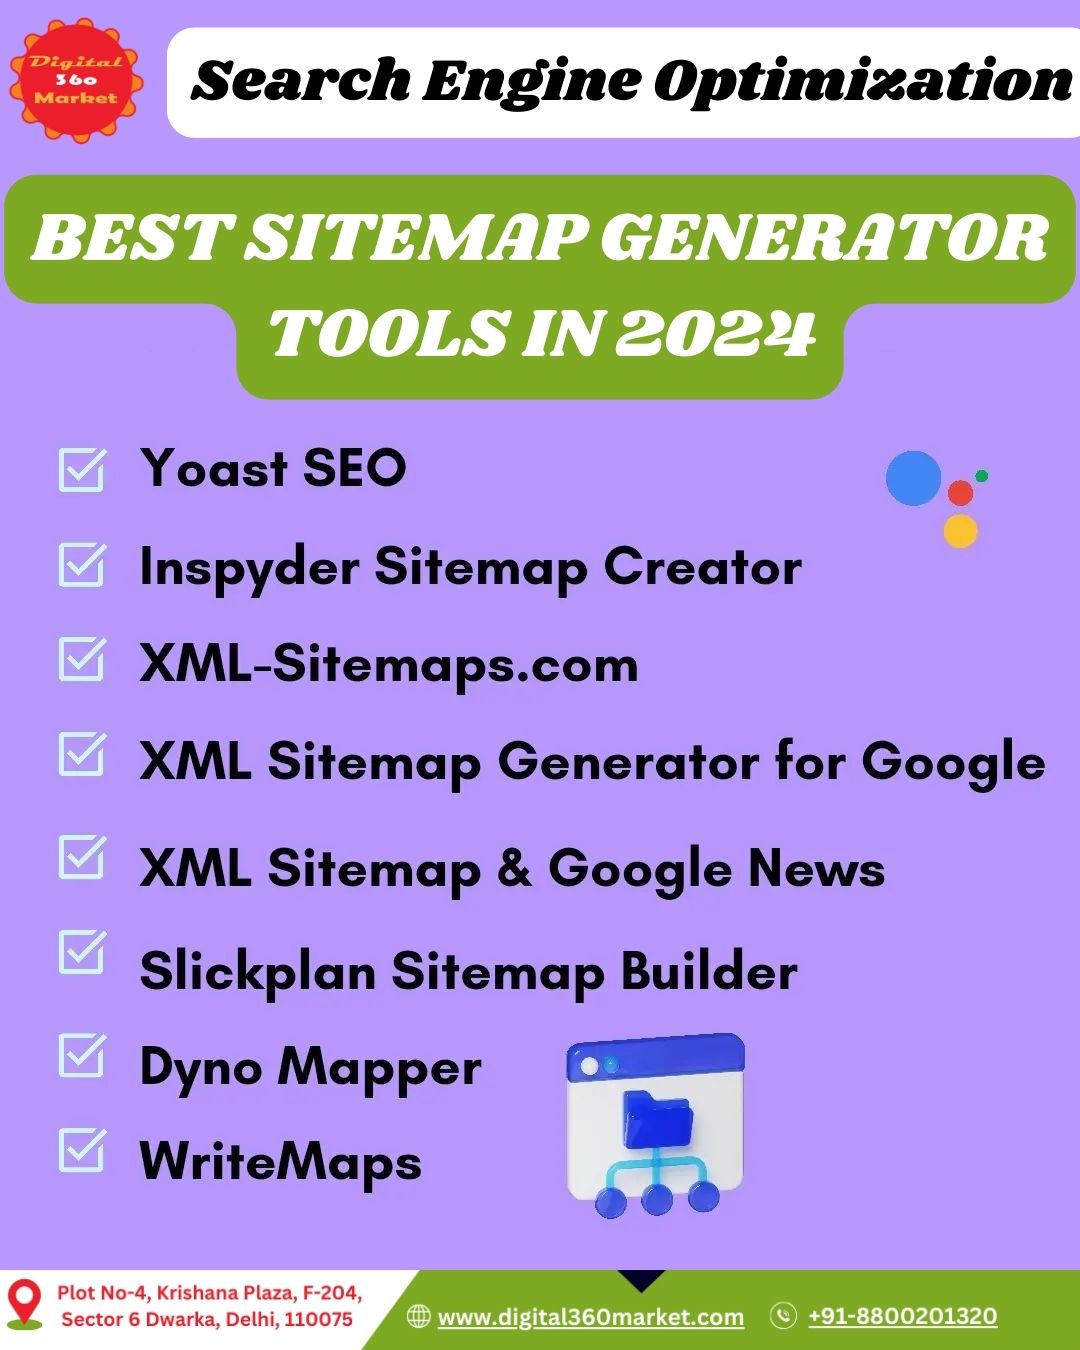 What is the best sitemap generator tools in 2024